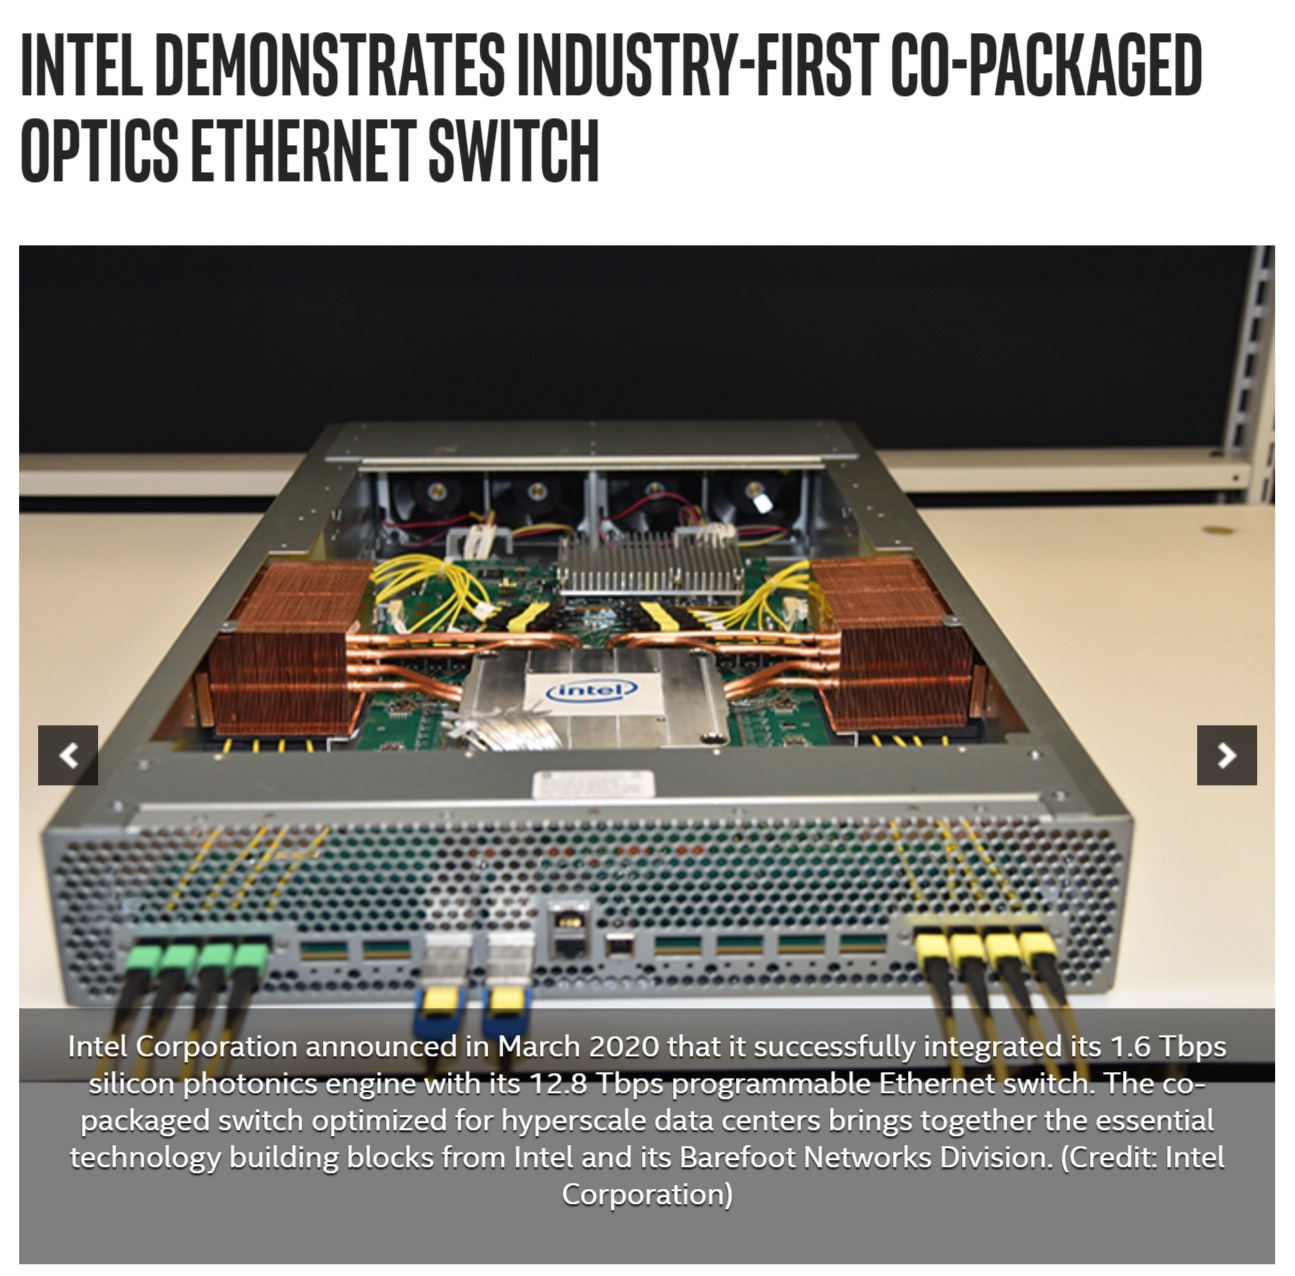 OGAWA, Tadashi on X: "=&gt; "Intel Demonstrates Industry-First Co-Packaged  Optics Ethernet Switch", Mar 5, 2020 https://t.co/BuWqFlMqVr 1.6 Tbps  silicon photonics engine (s?) (4x 400GBase-DR4 I/O) with Barefoot Tofino 2,  12.8 Tbps programmable